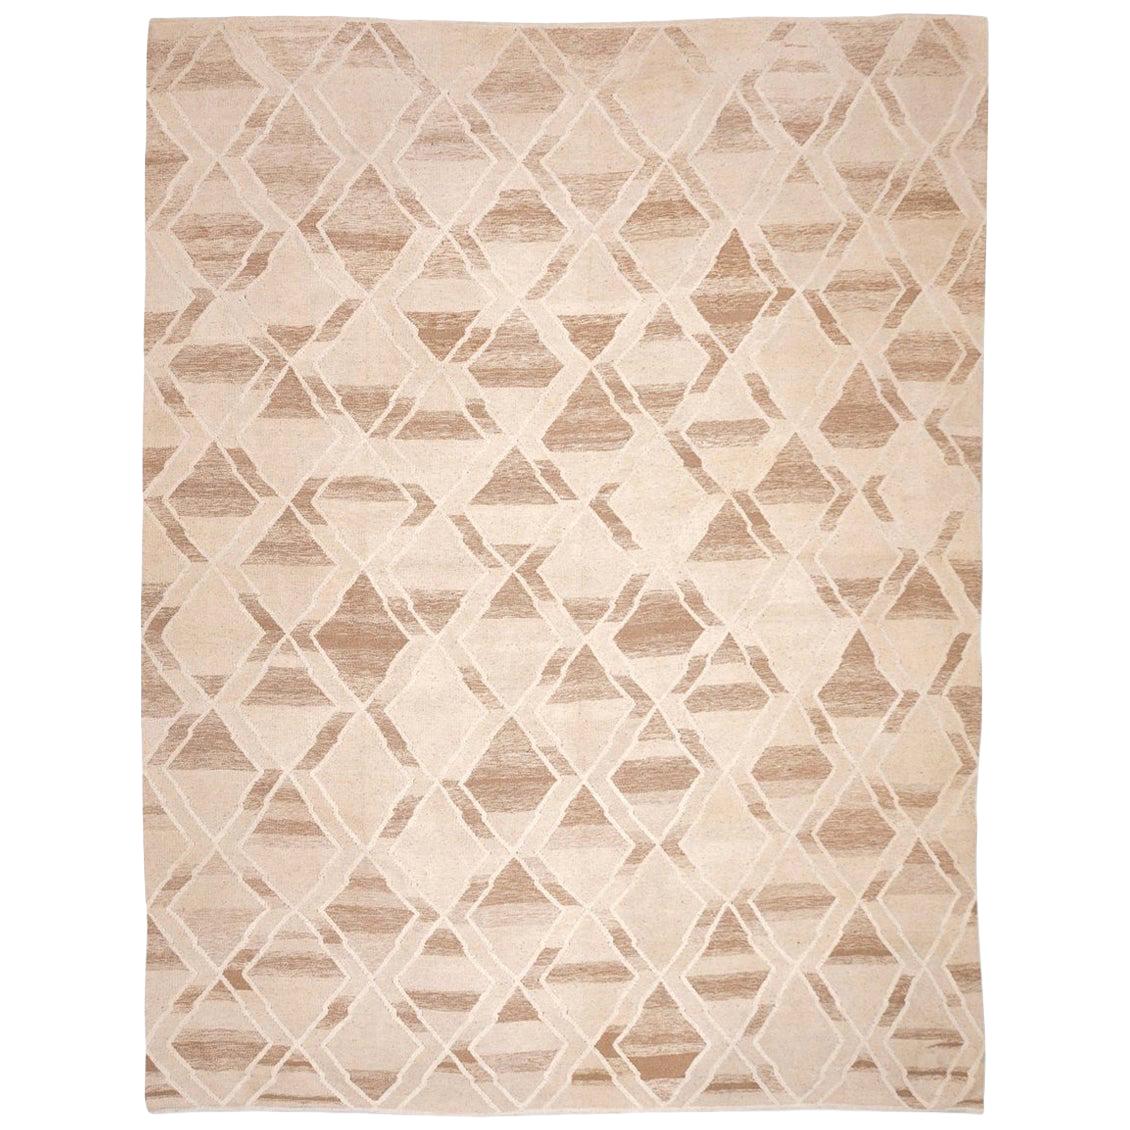 Contemporary Kilim Rhombus Design Made of Wool Soft Colors